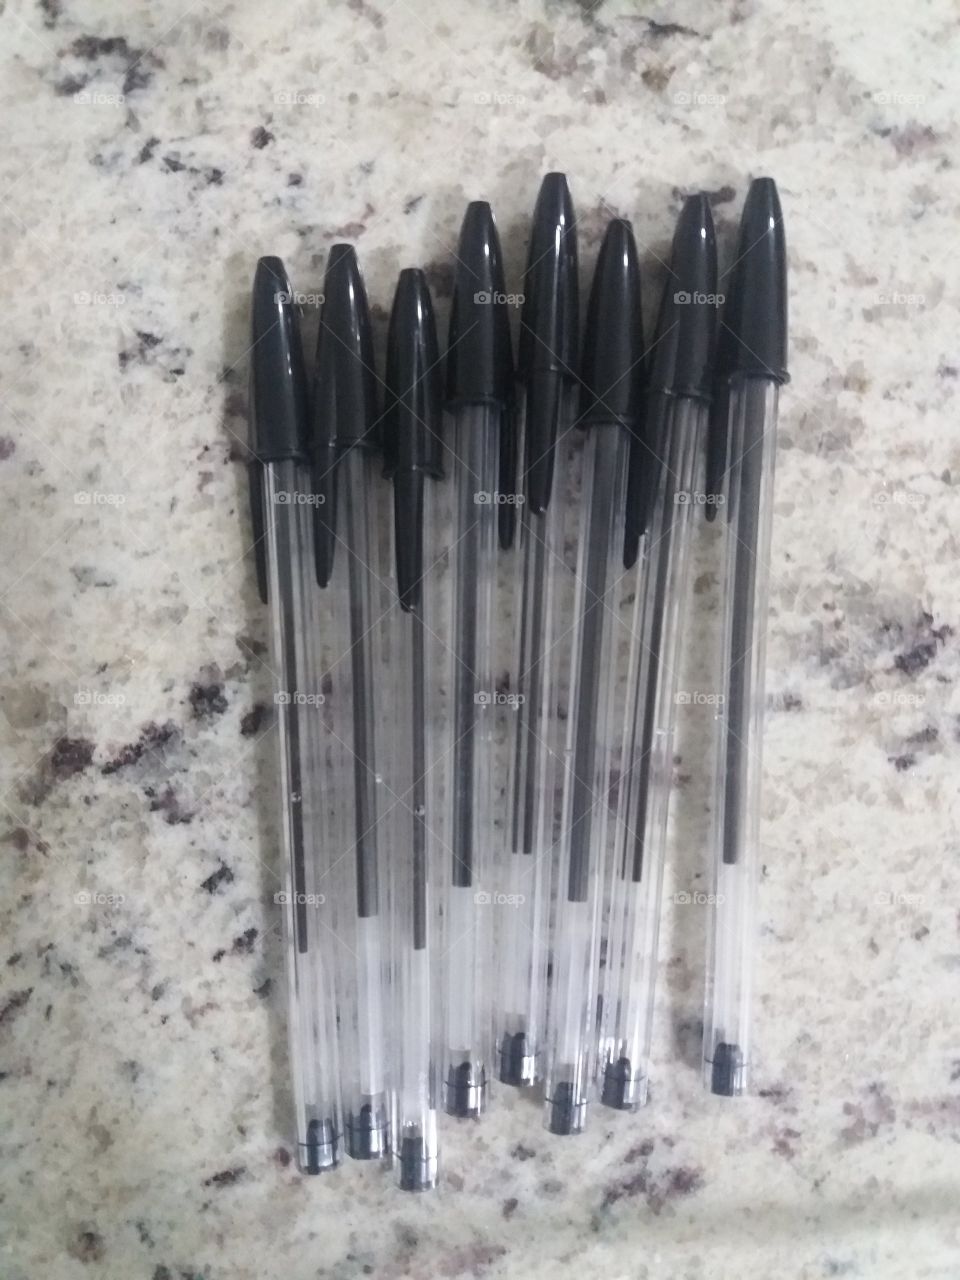 pens and pens